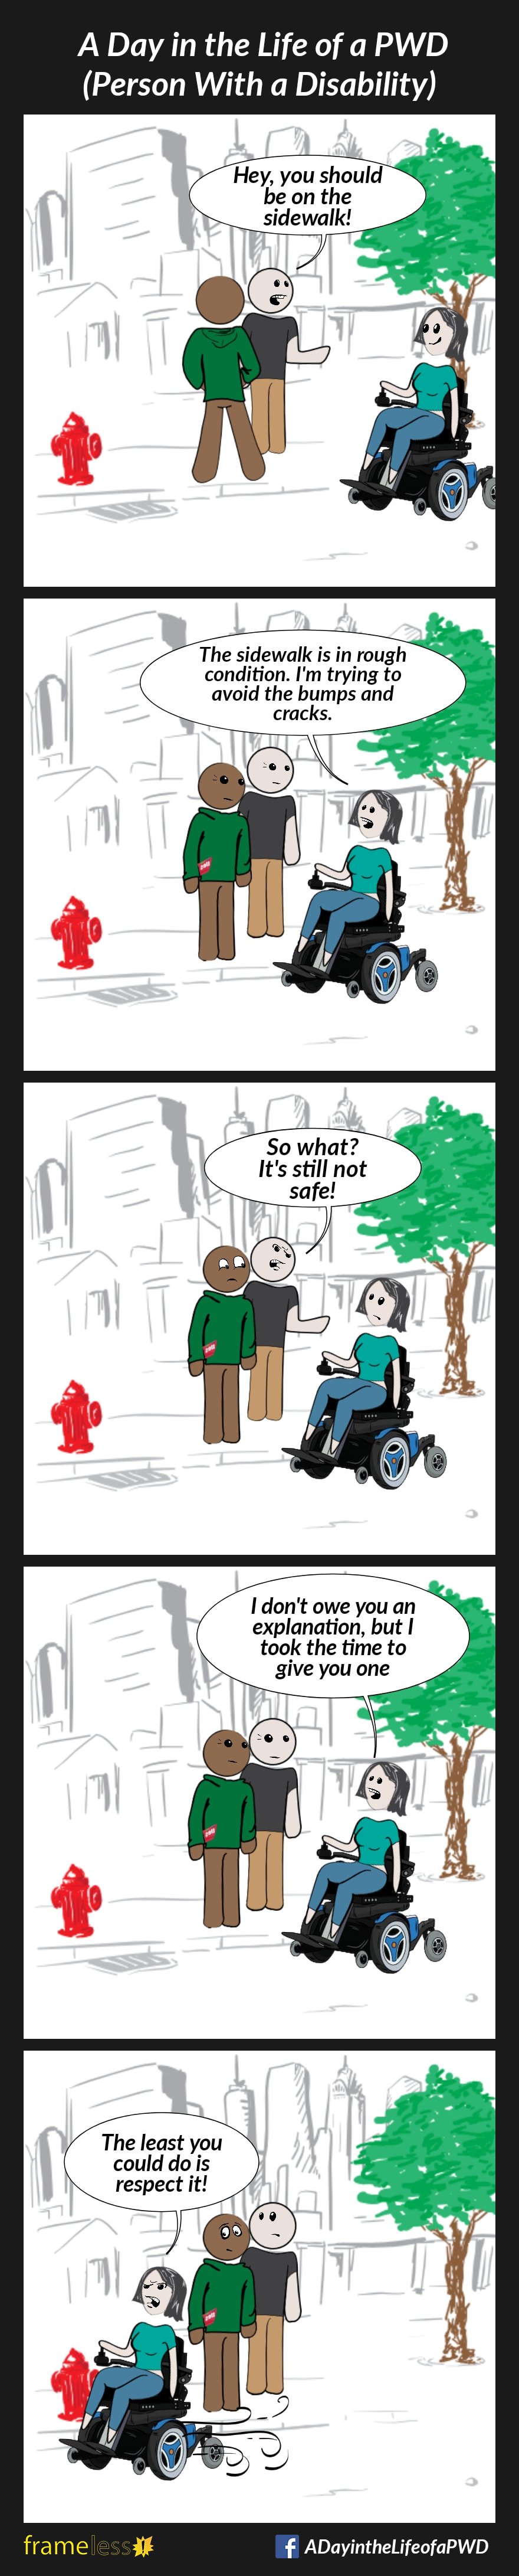 COMIC STRIP 
A Day in the Life of a PWD (Person With a Disability) 

Frame 1:
A woman in a power wheelchair is traveling down a street. A man and his friend are standing on the sidewalk chatting. The man notices the woman.
MAN: Hey, you should be on the sidewalk!

Frame 2:
The woman stops.
WOMAN: The sidewalk is in rough condition. I'm trying to avoid the bumps and cracks.

Frame 3:
MAN: So what? It's still not safe!

Frame 4:
WOMAN: I don't owe you an explanation, but I took the time to give you one

Frame 5:
WOMAN: The least you could do is respect it!
The woman wheels away.